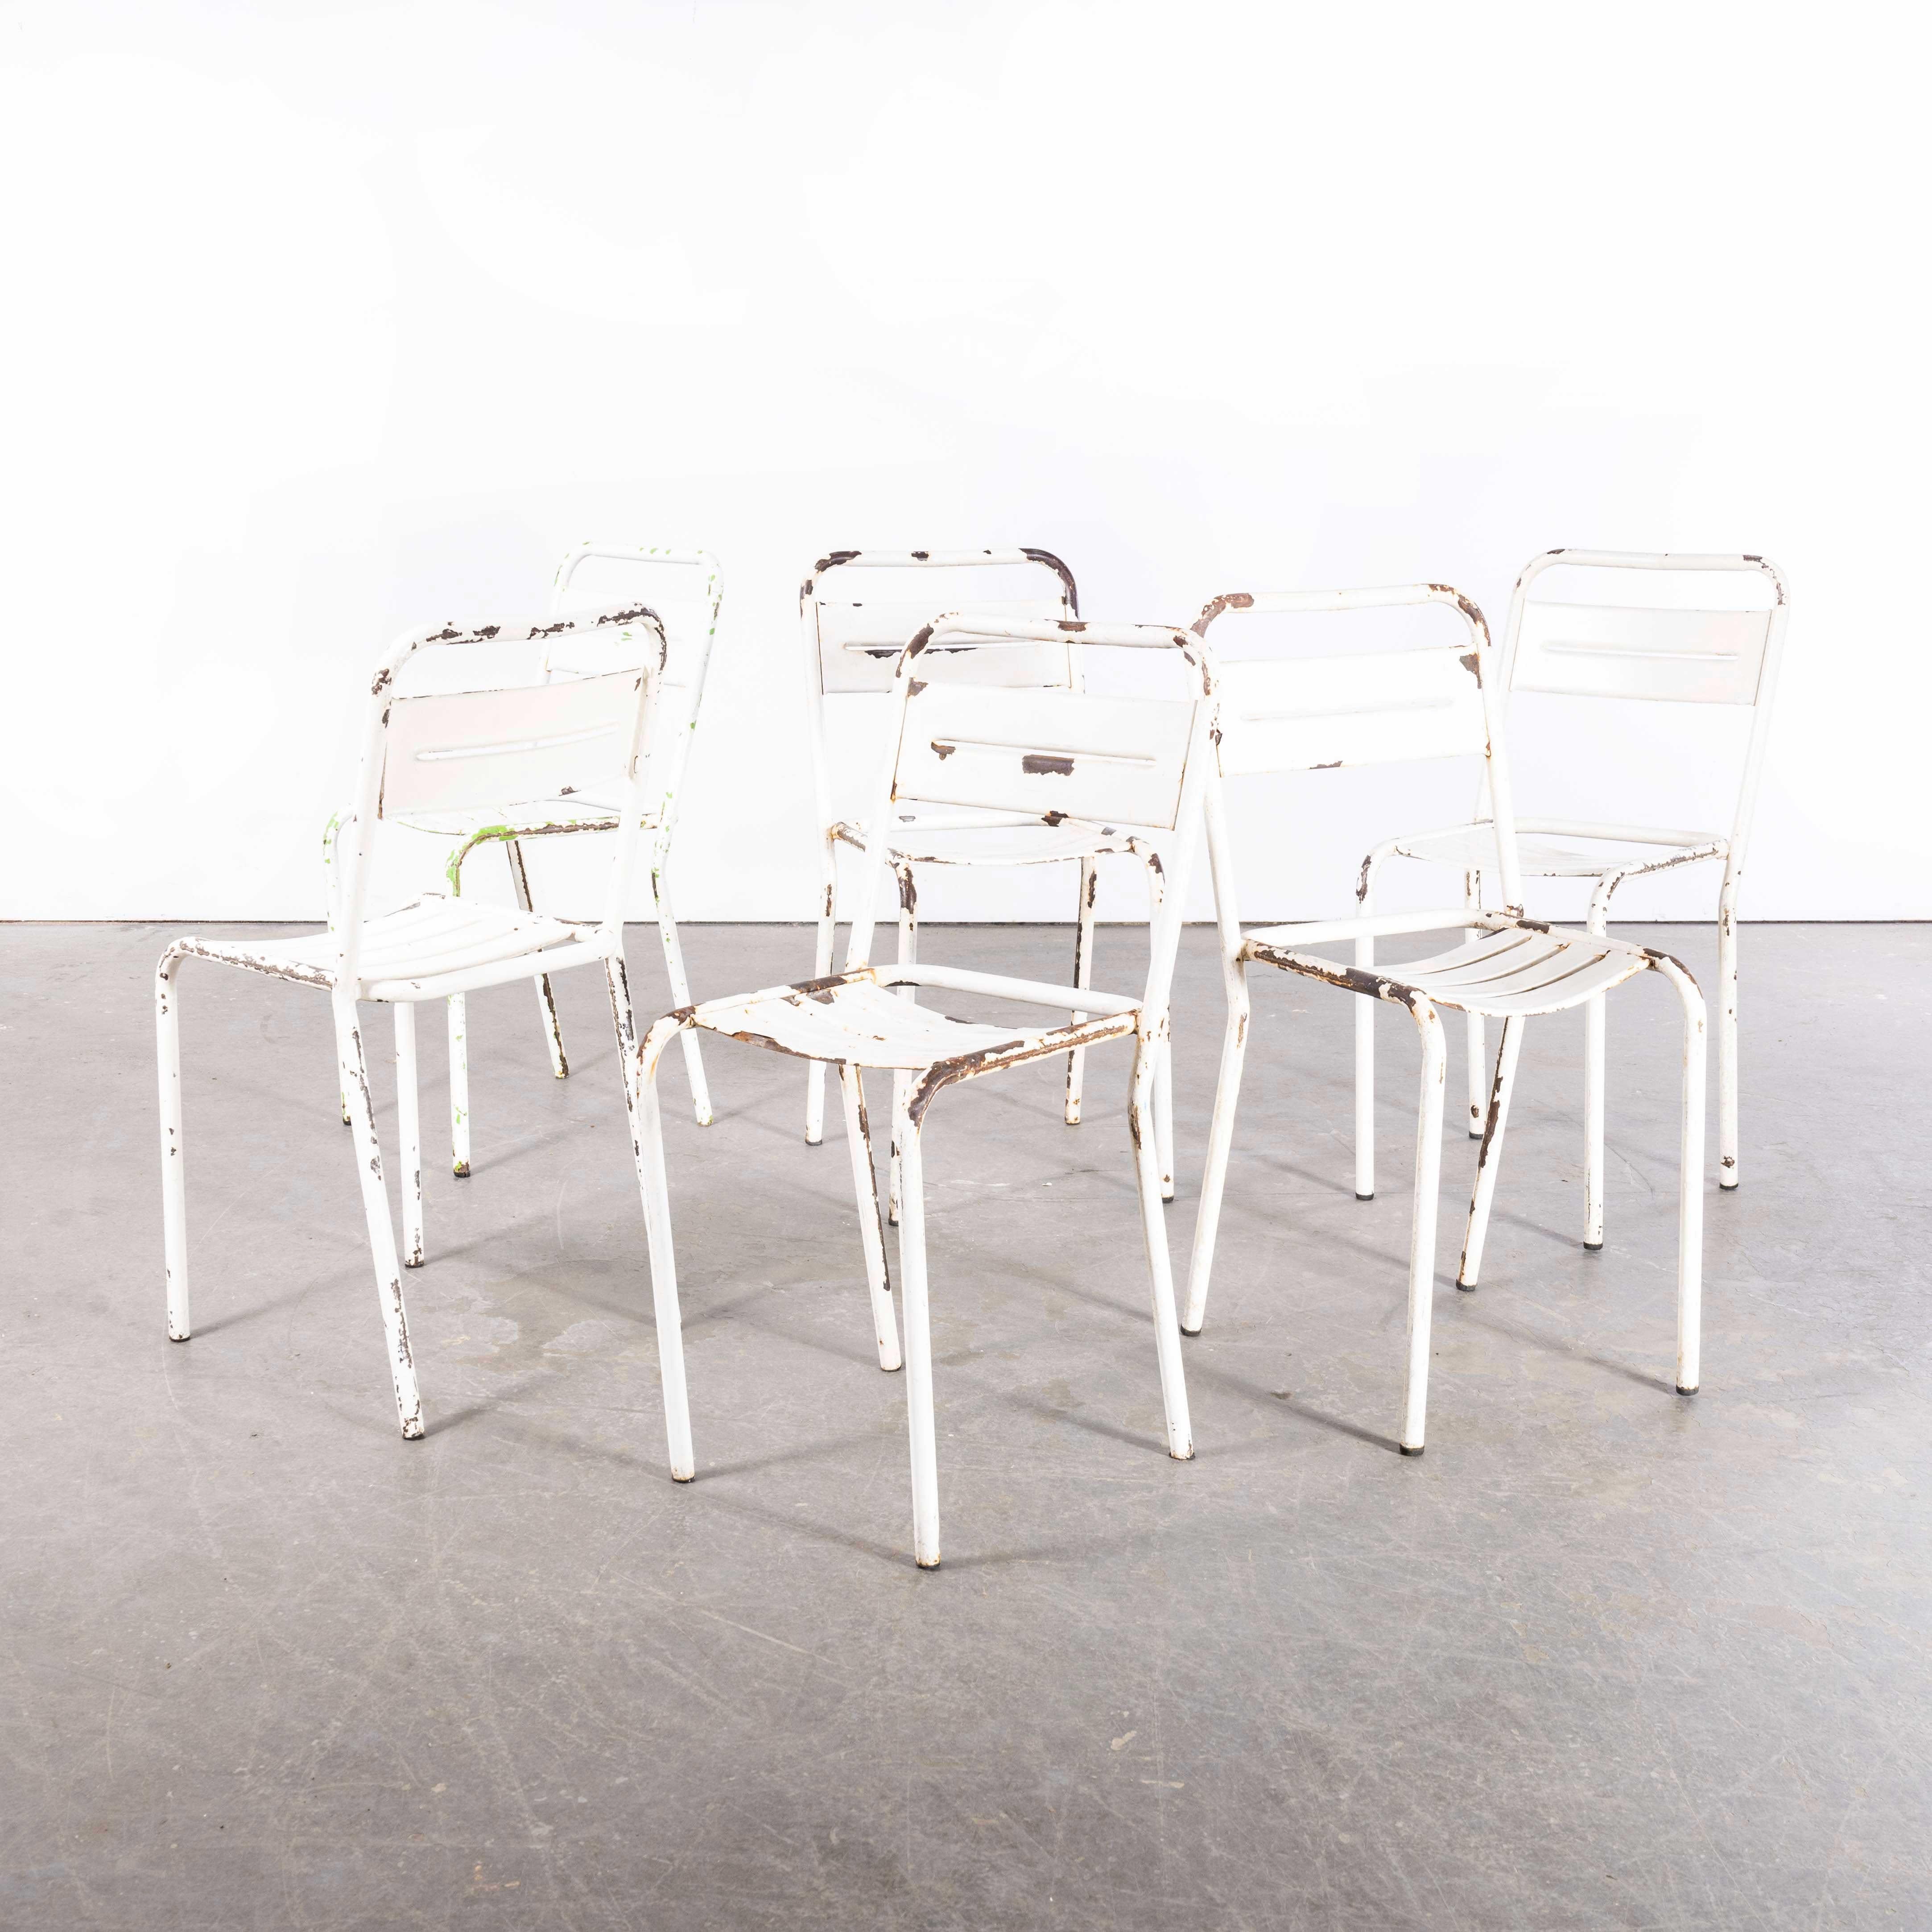 1950's French  White Metal Stacking Outdoor Chairs - Set Of Six

1950's French  White Metal Stacking Outdoor Chairs - Set Of Six. Reminiscent of Tolix but not made by Tolix, this style of chair was industrially produced in the 1950’s by various